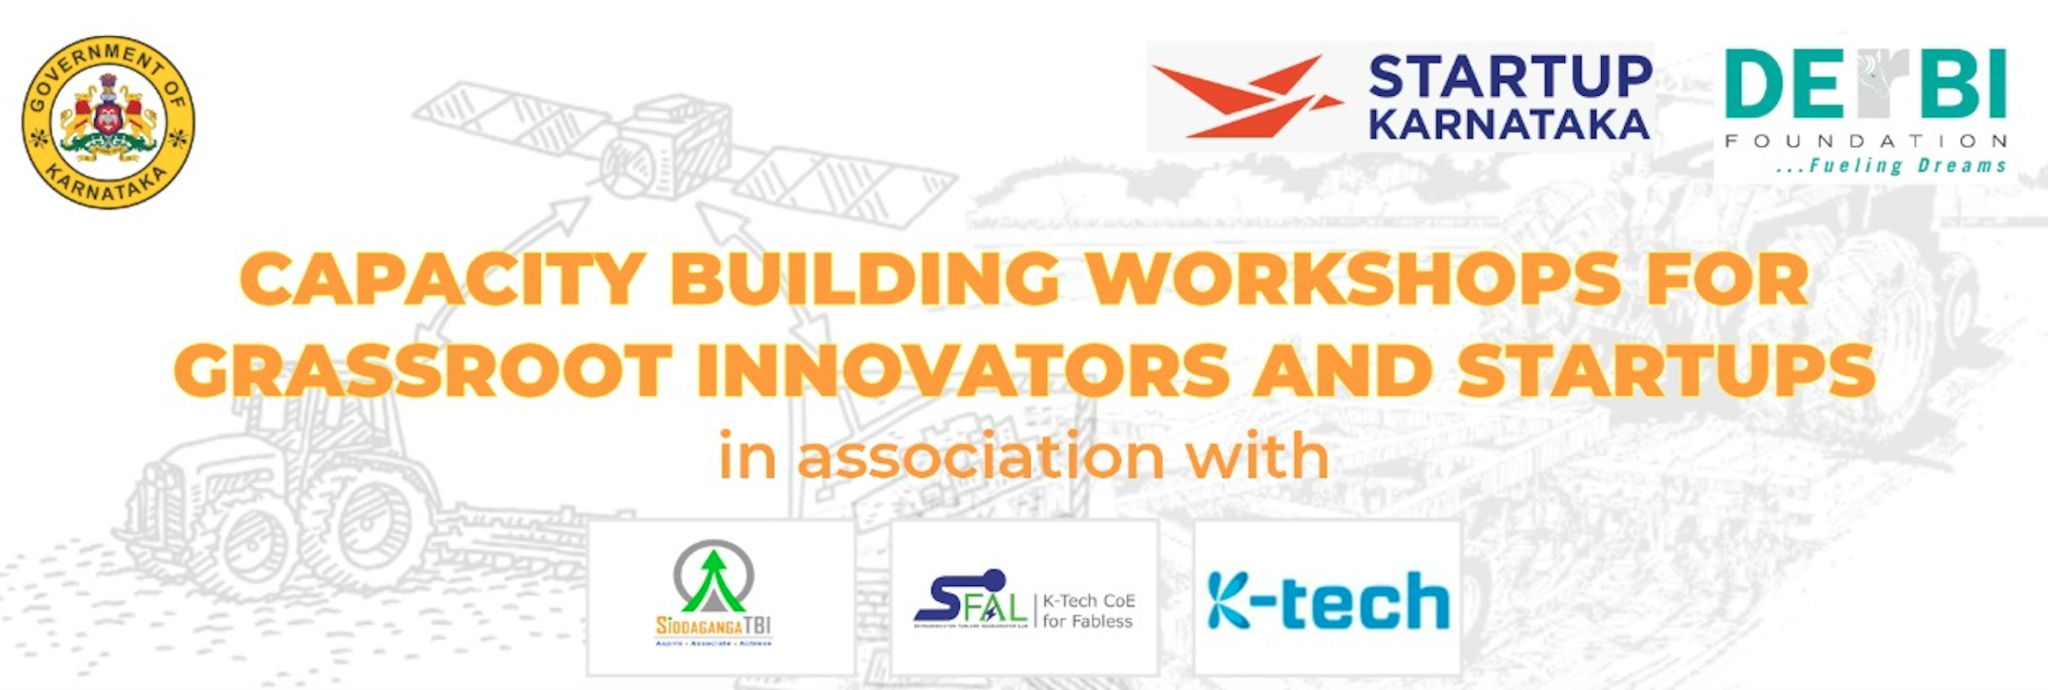 Capacity Building Workshops for Grassroot Innovators and Startups